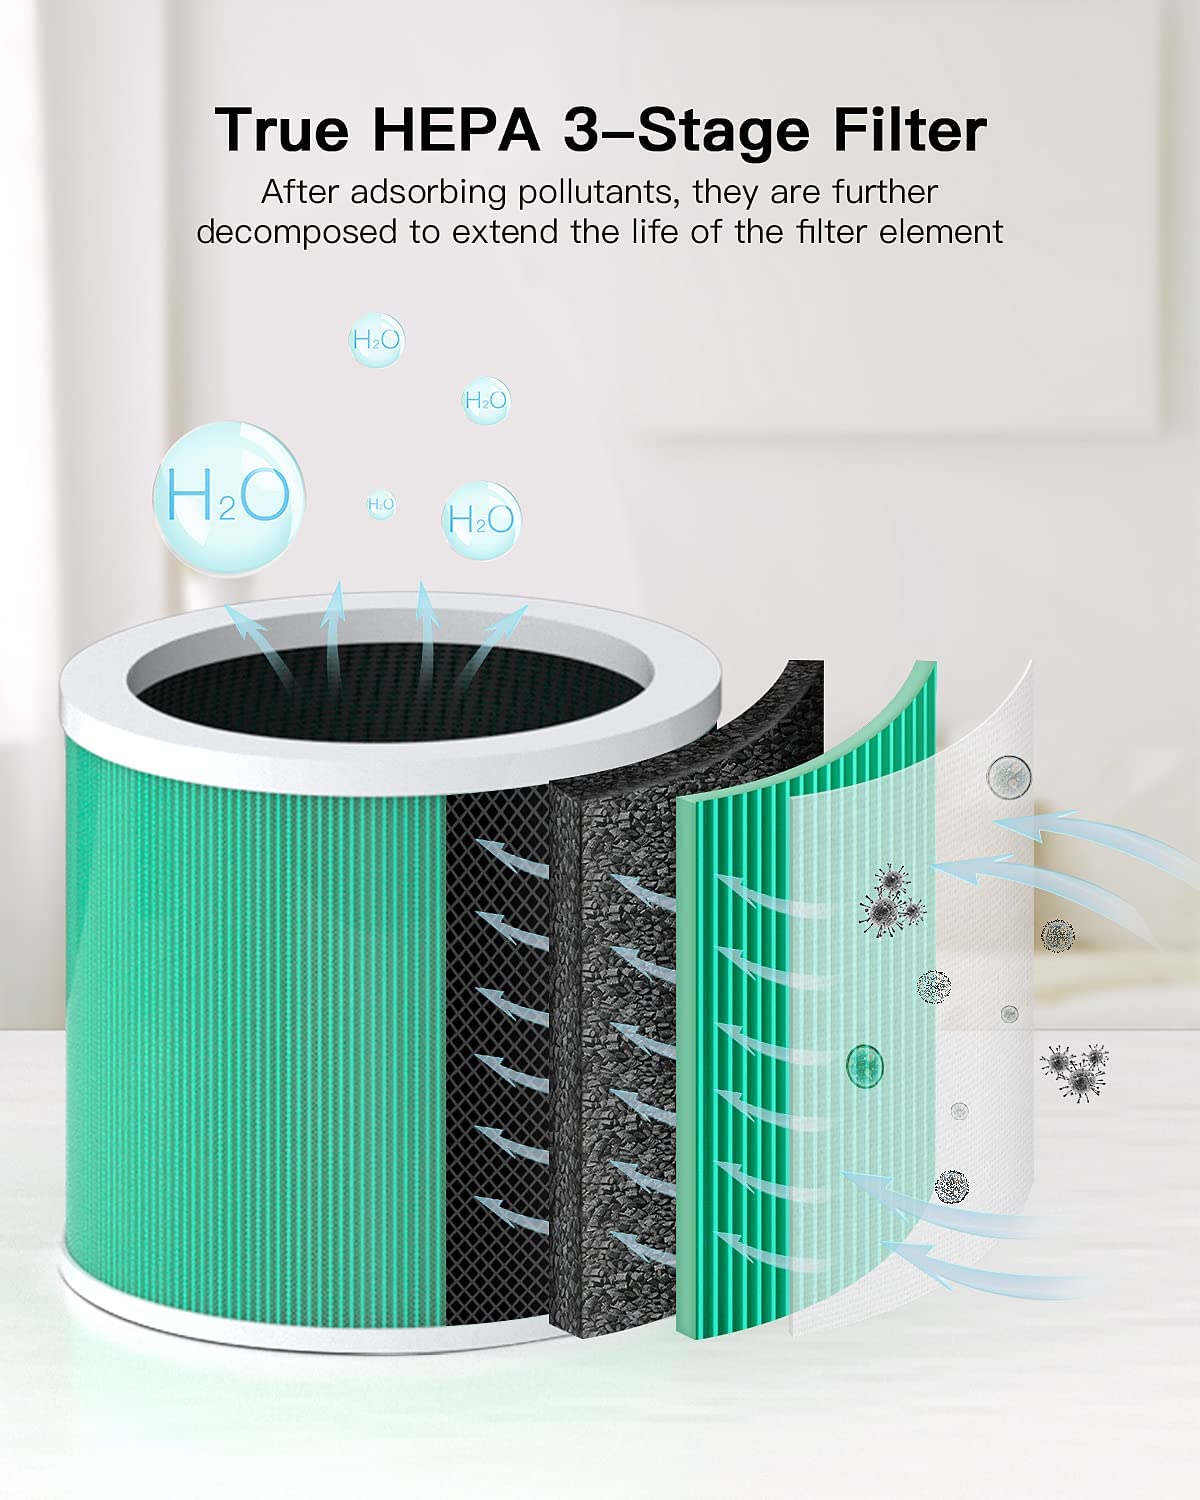 Core 300 Air Purifier Replacement Filter, 3-in-1 True HEPA, High